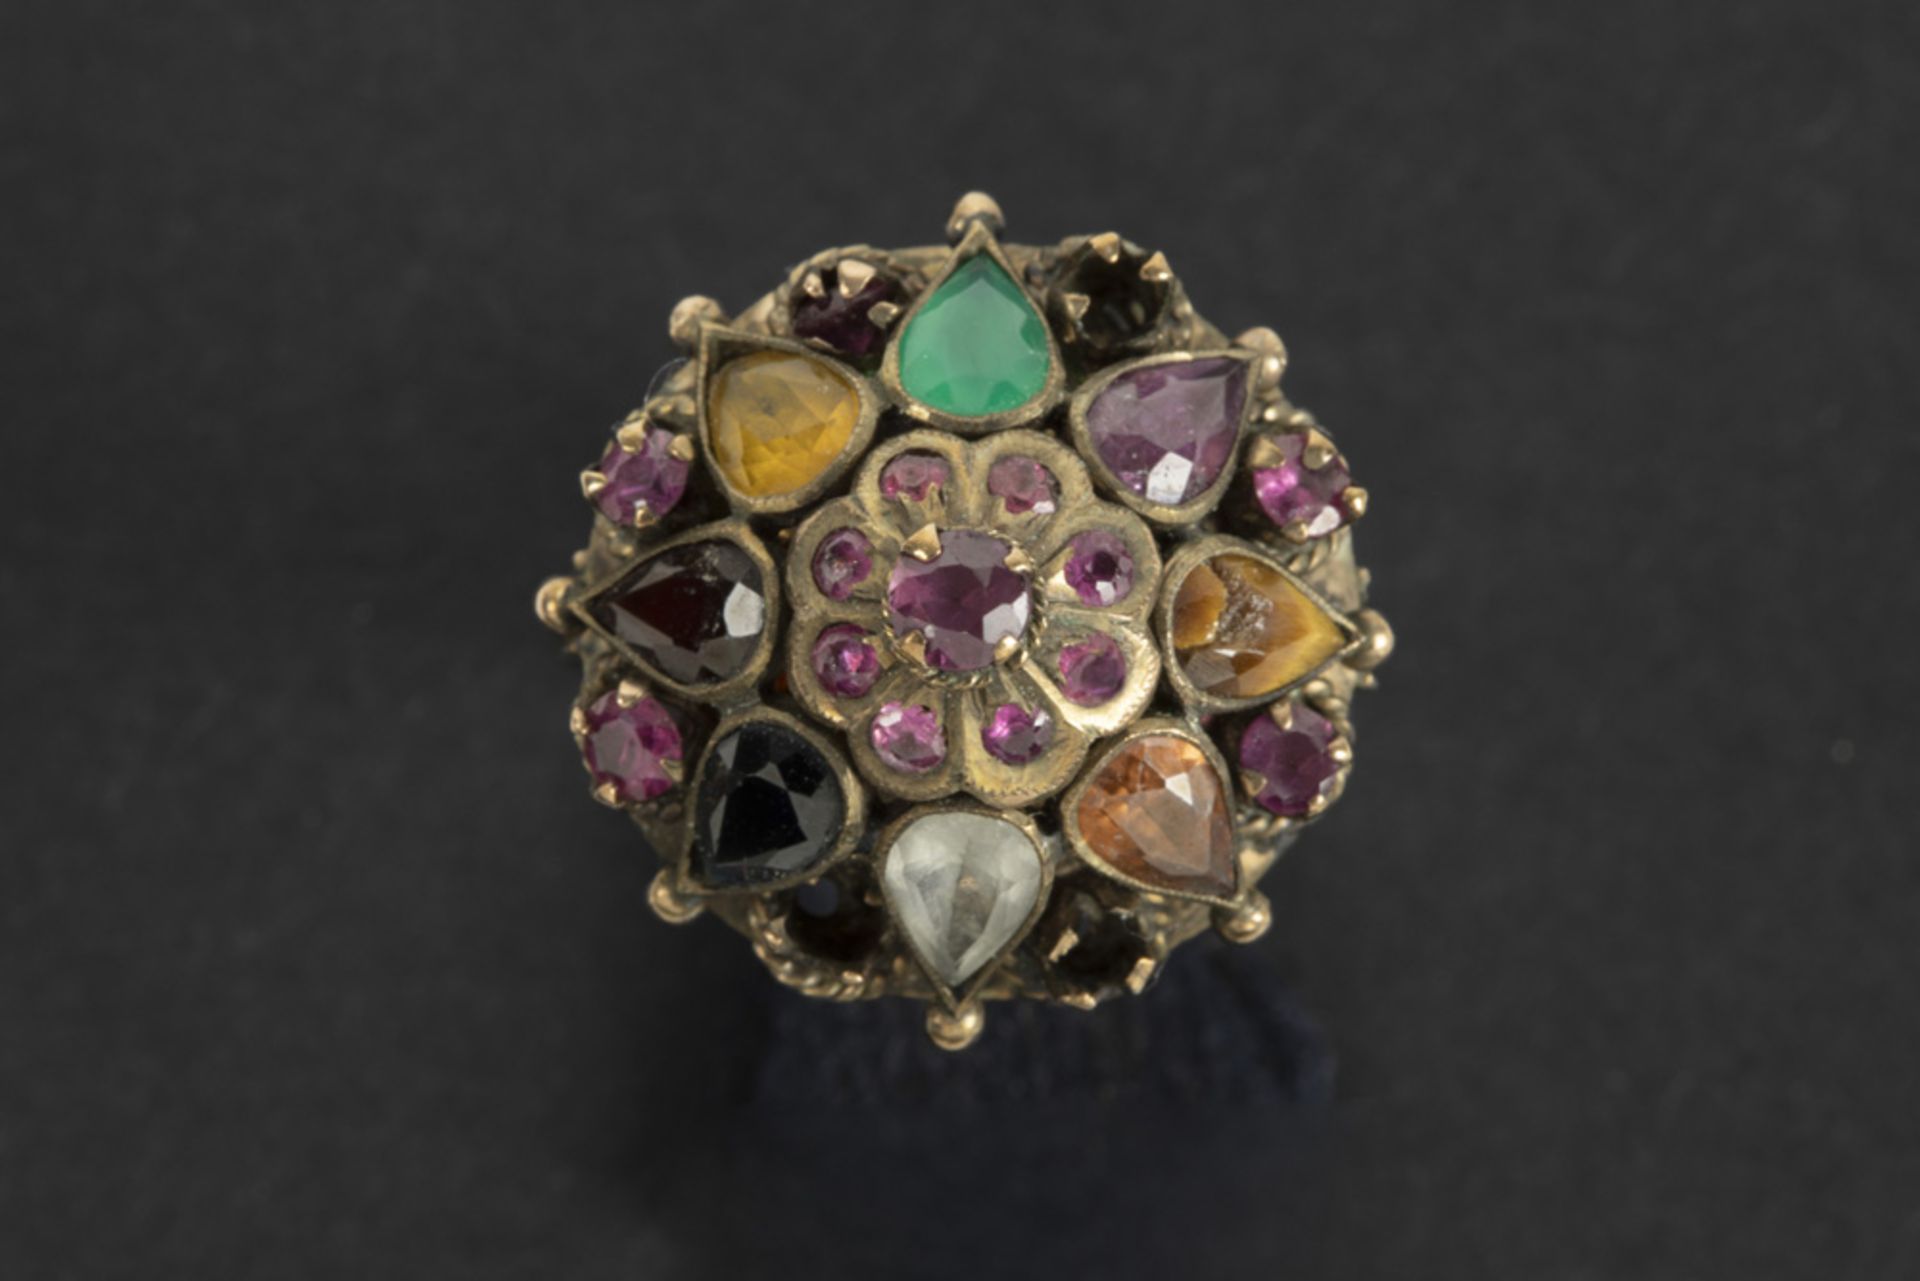 antique ring in pink gold (18 carat) with several precious stones such as emerald, ruby and